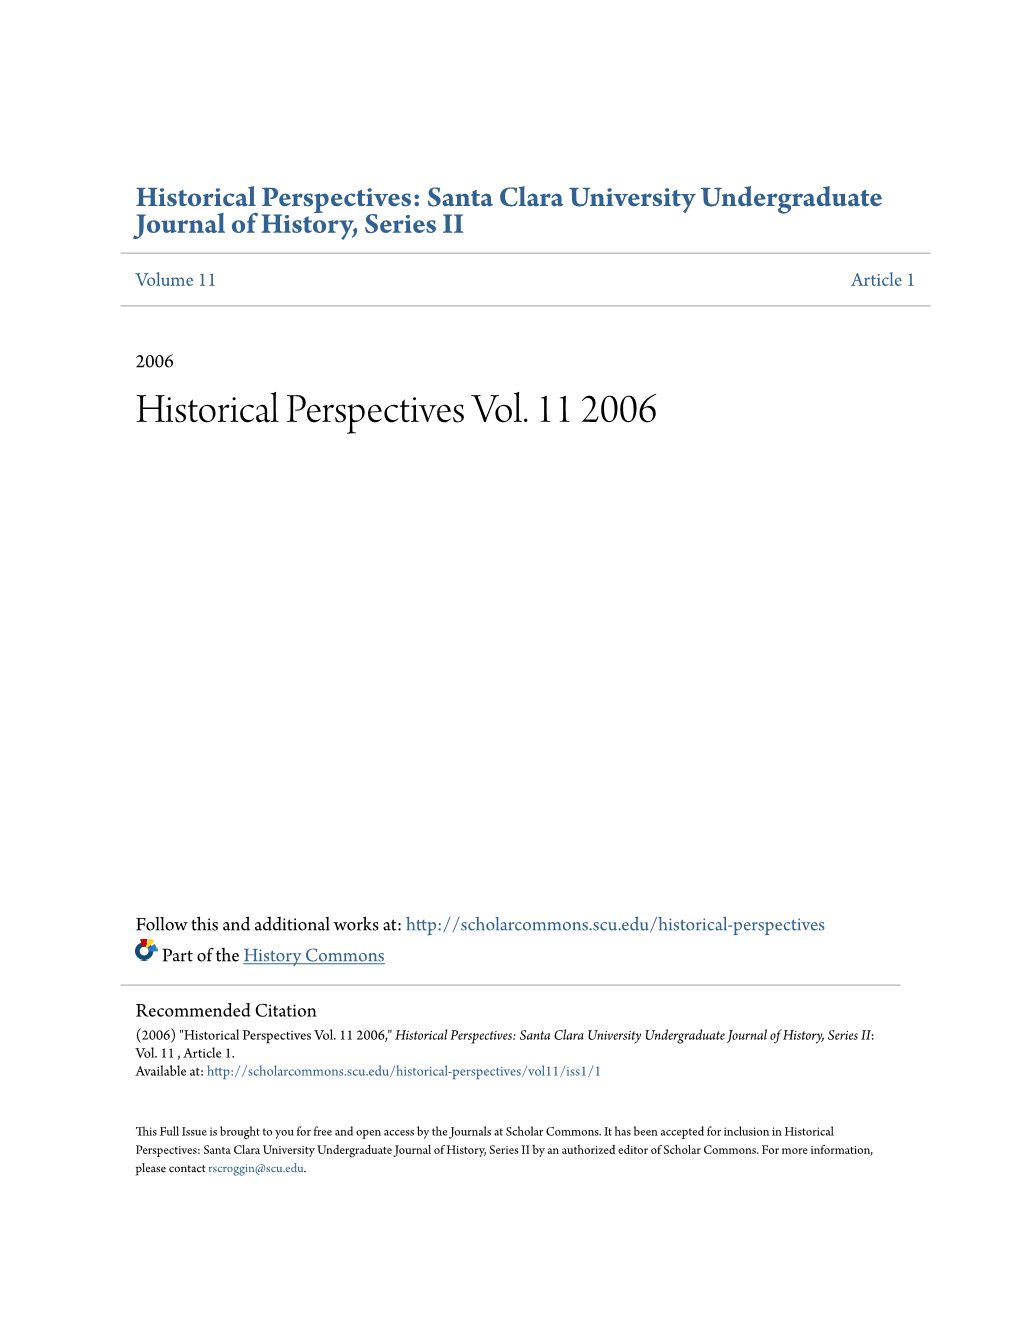 Historical Perspectives Vol. 11 2006